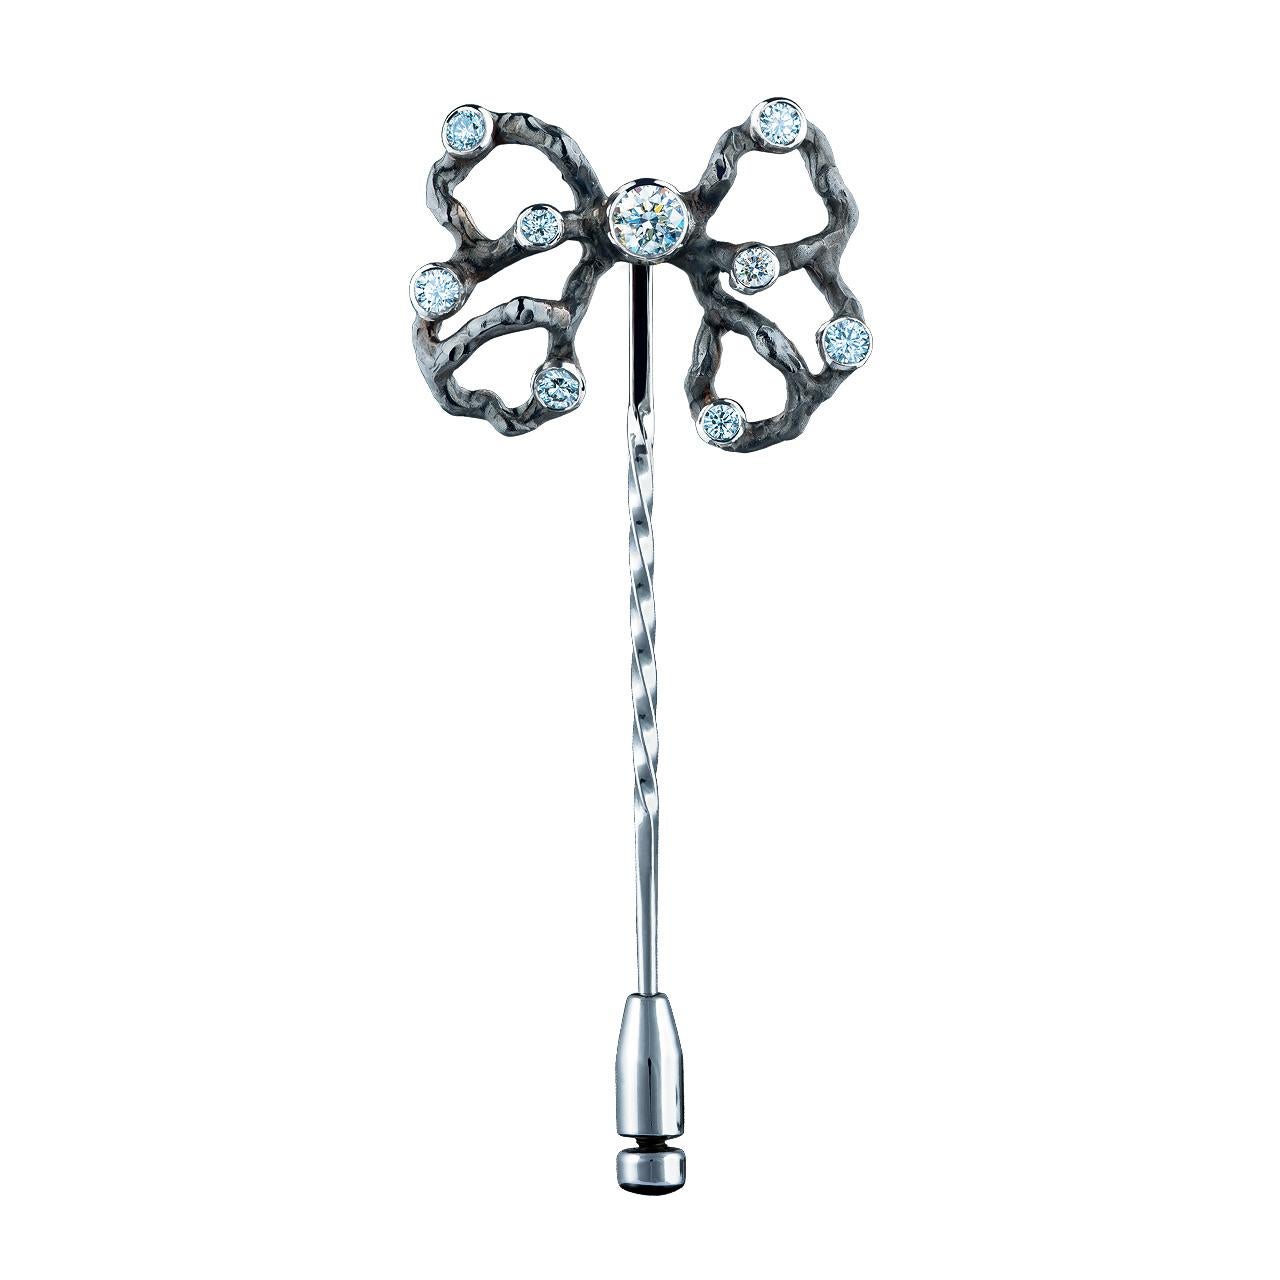 - 9 Round Diamonds - 0.31 ct, D-F/ VVS2-VS1
- 18K White Gold 
- Weight: 4.03 g
This Pin is made in the author’s manner using blackened 18K white gold with a special facture. Jewellery Theatre creates the graceful butterfly decorated with a